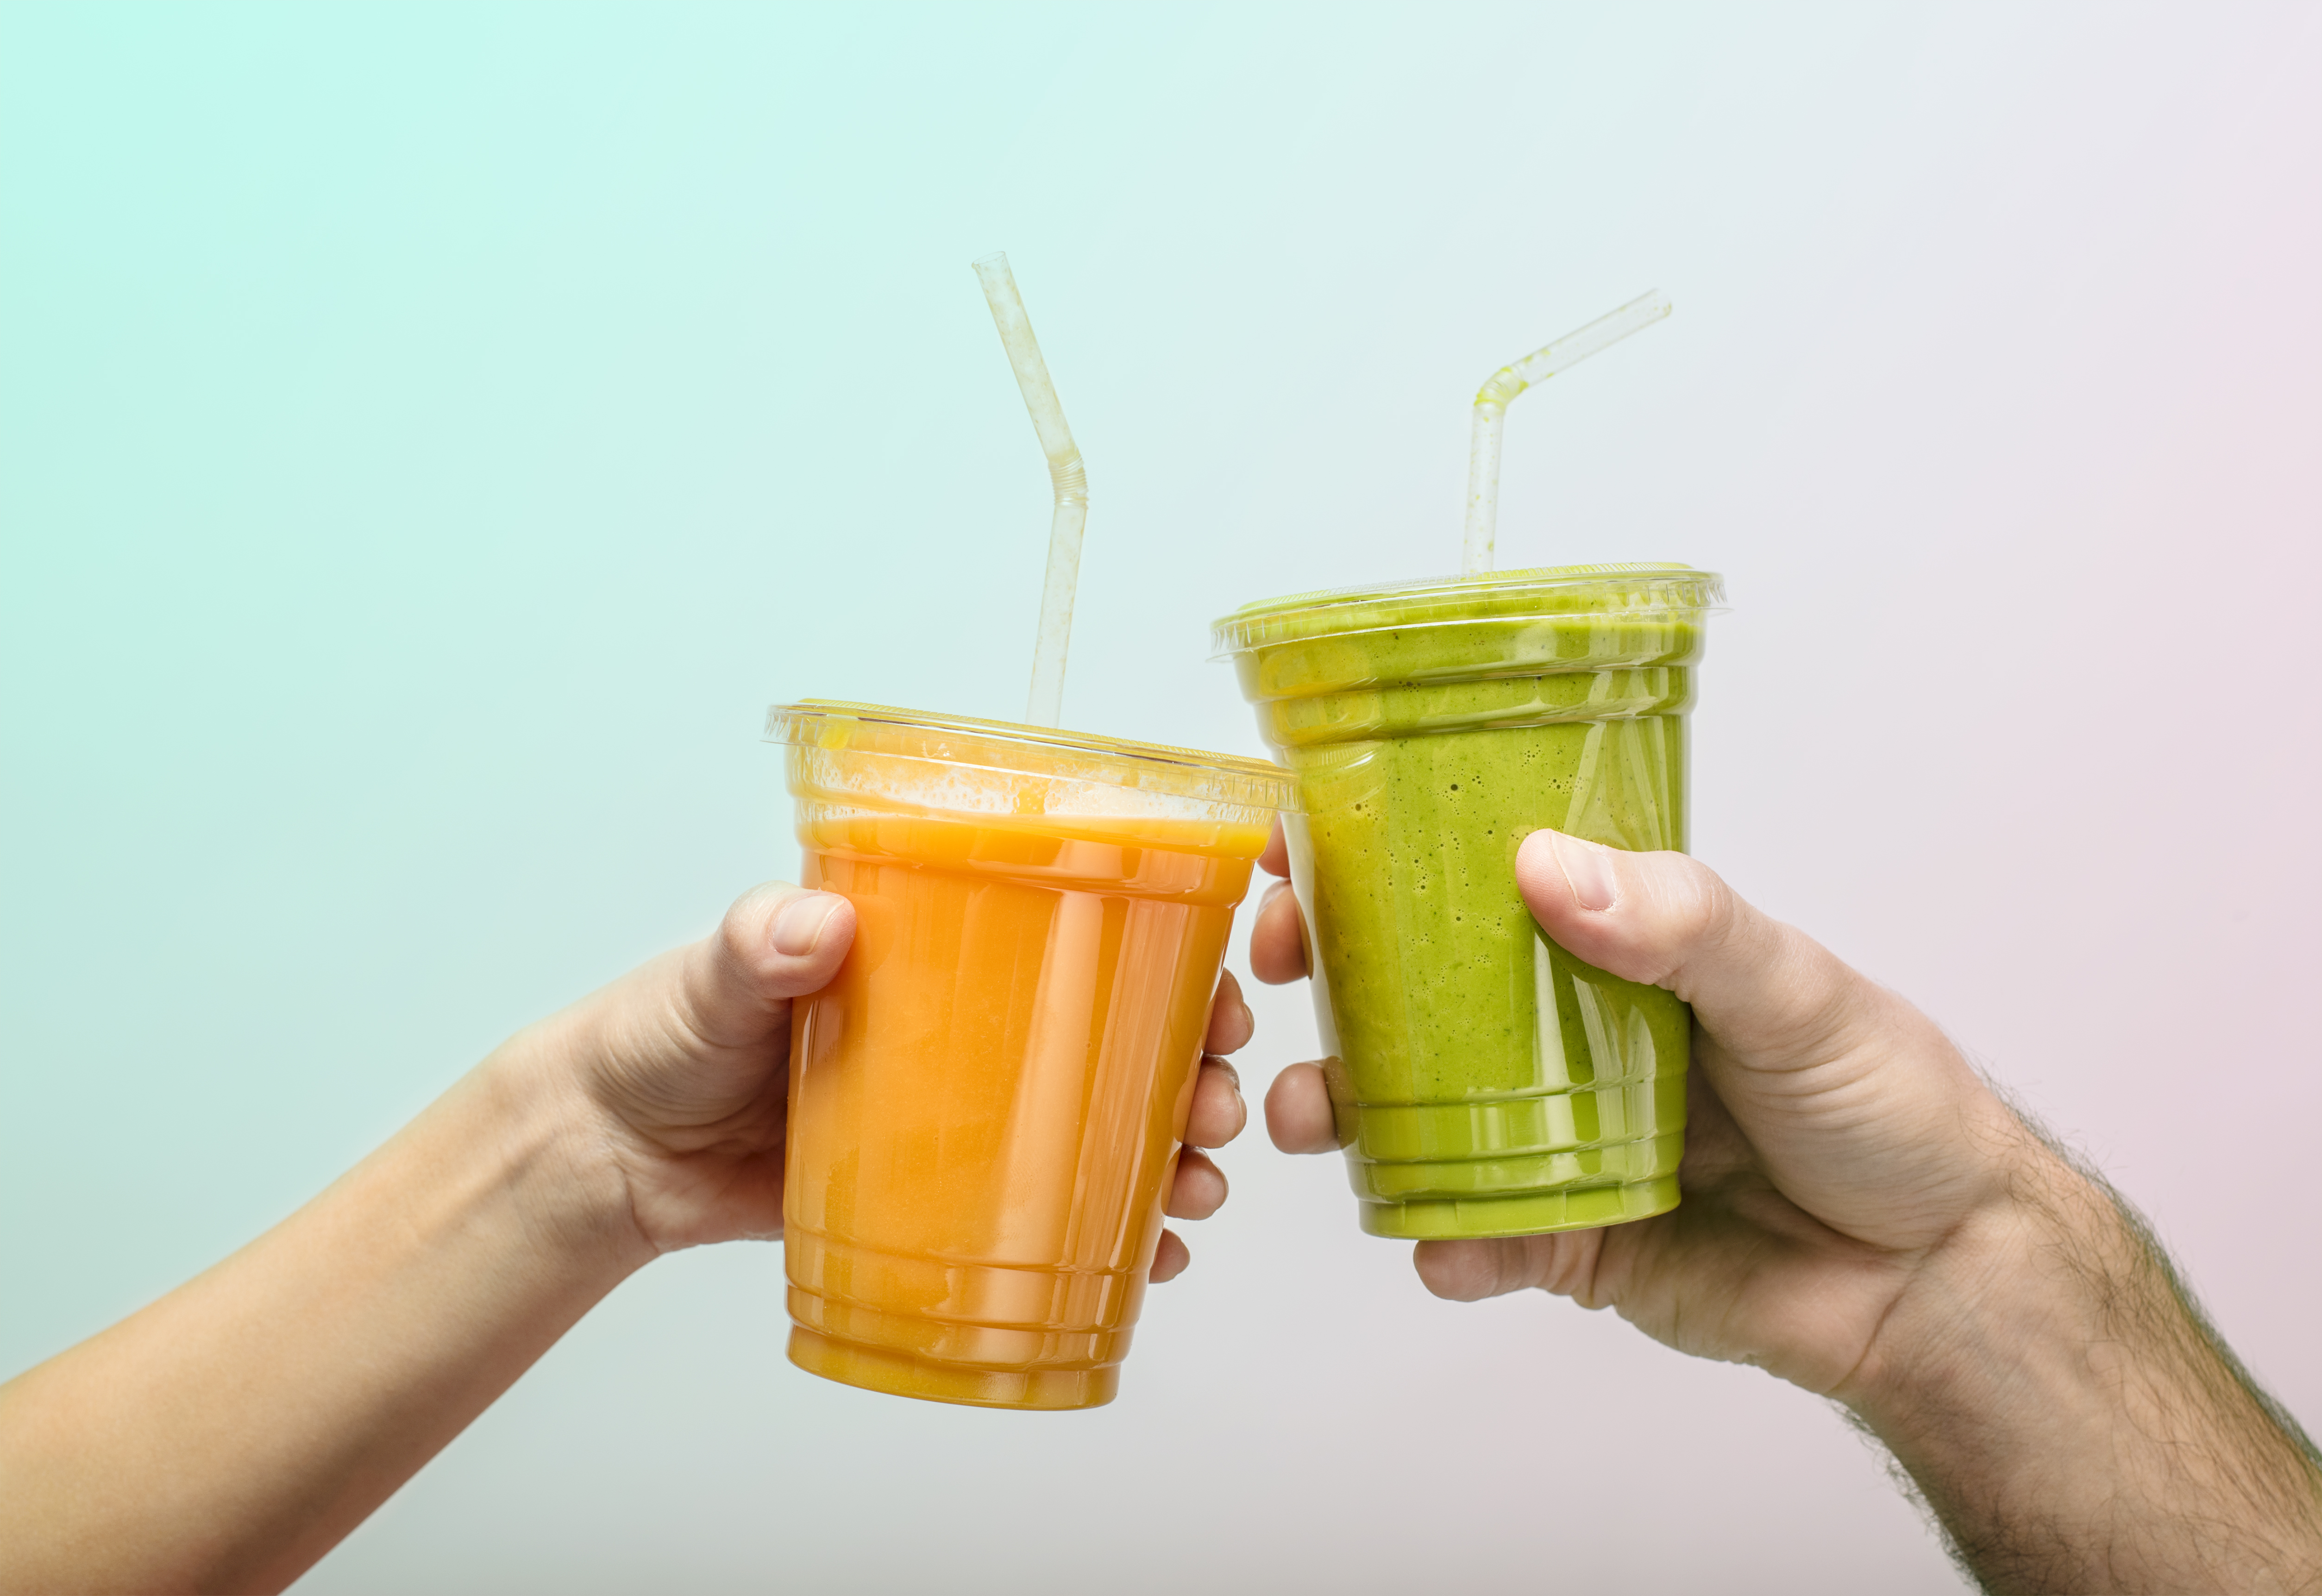 is drinking juice healthy? | time